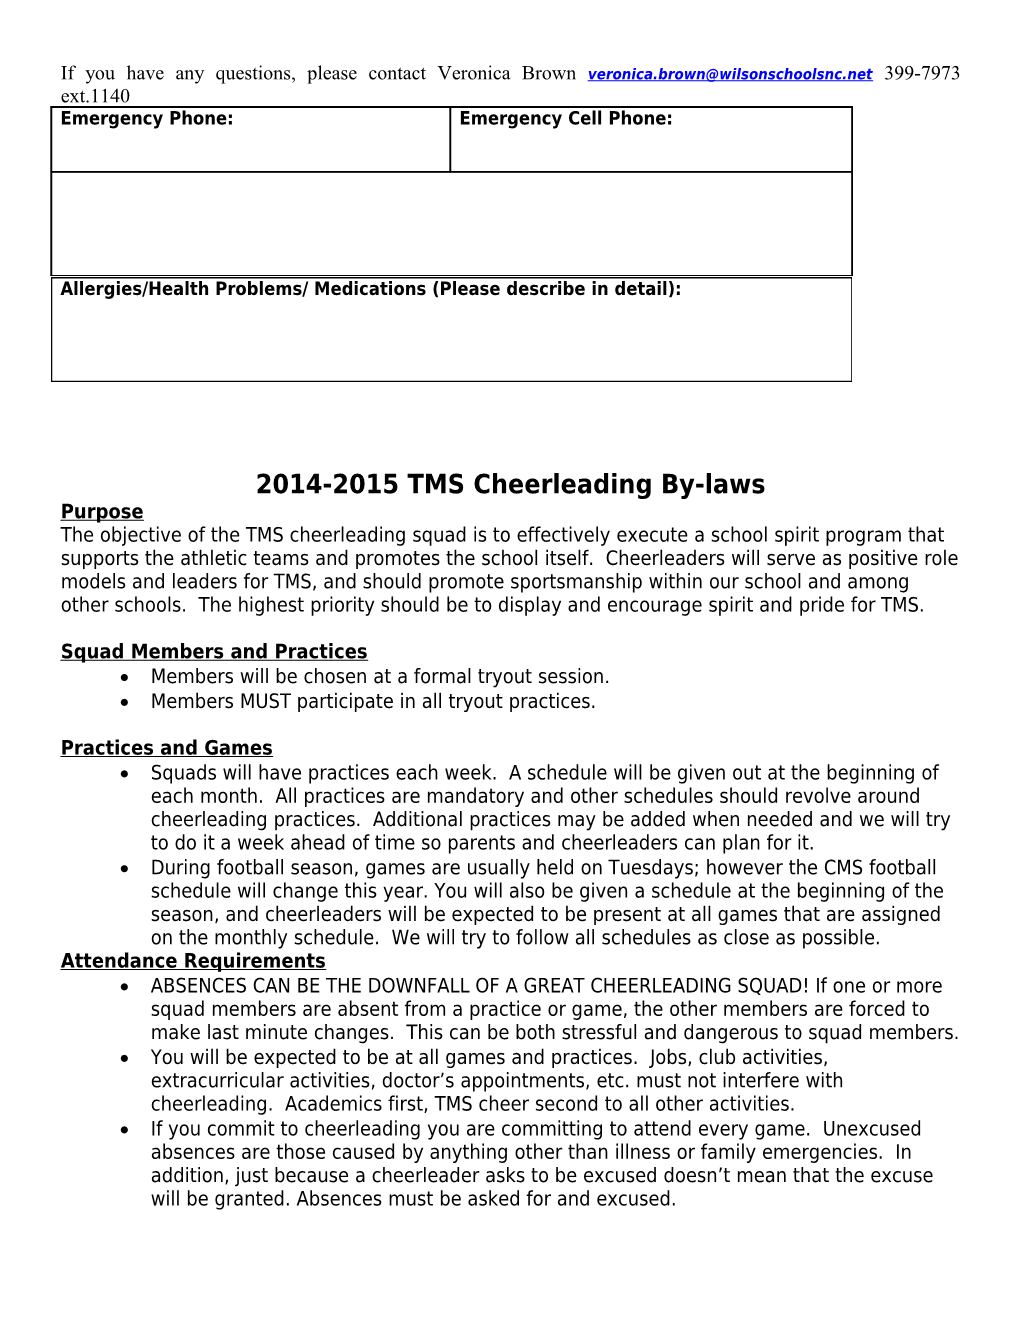 Butler High School Cheerleading Tryout Packet s1